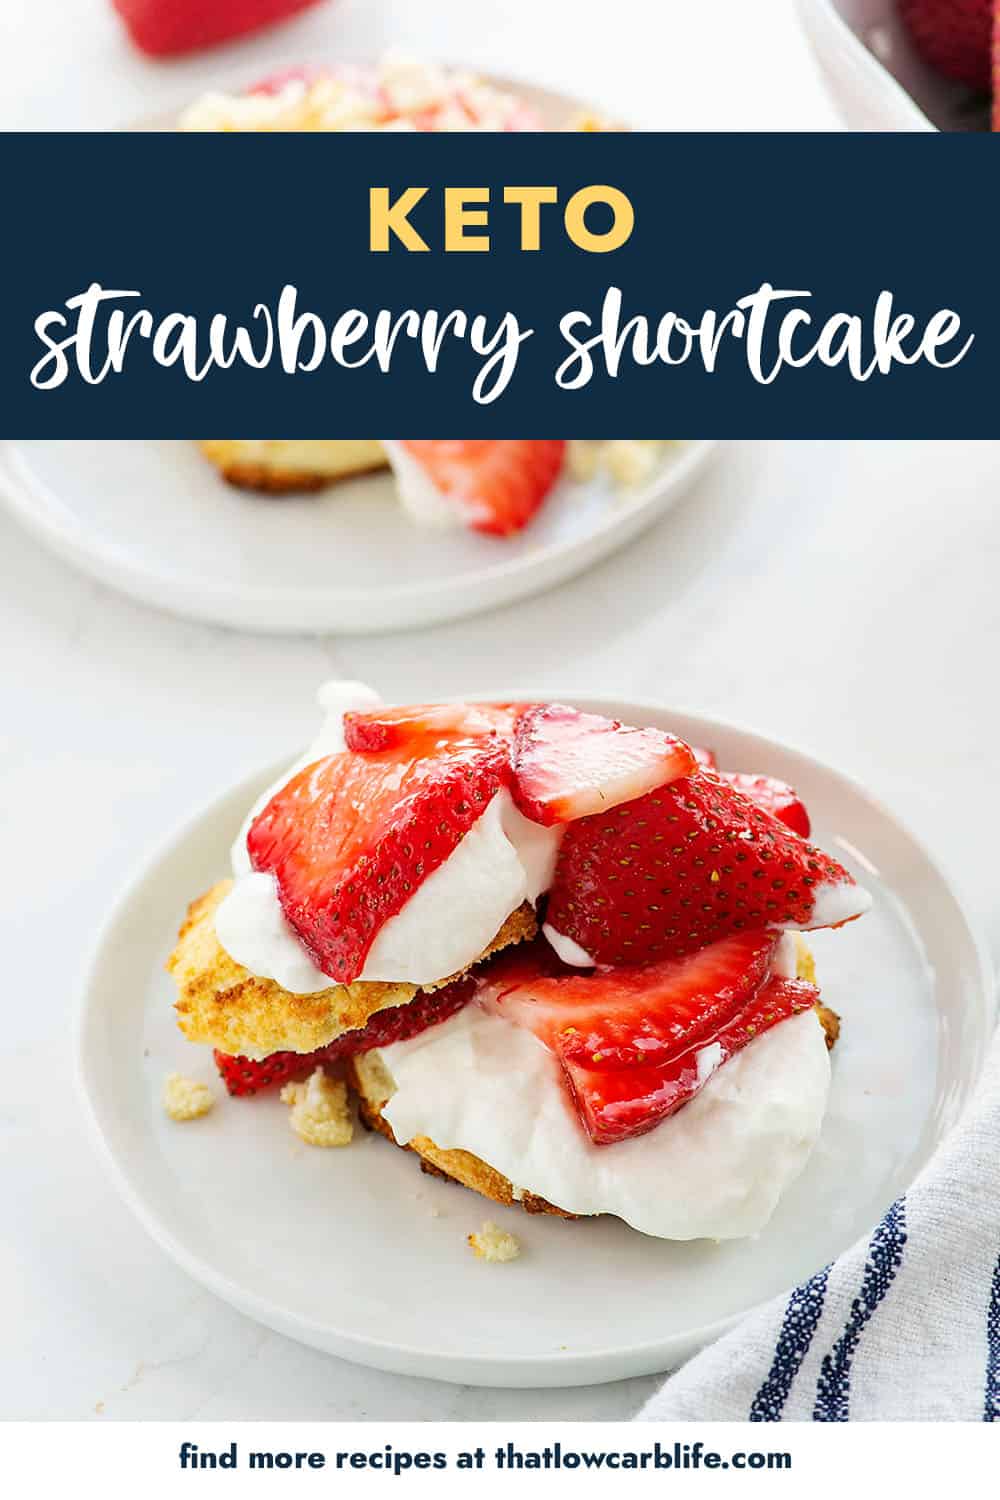 keto strawberry shortcake recipe on small white plate with text for Pinterest.